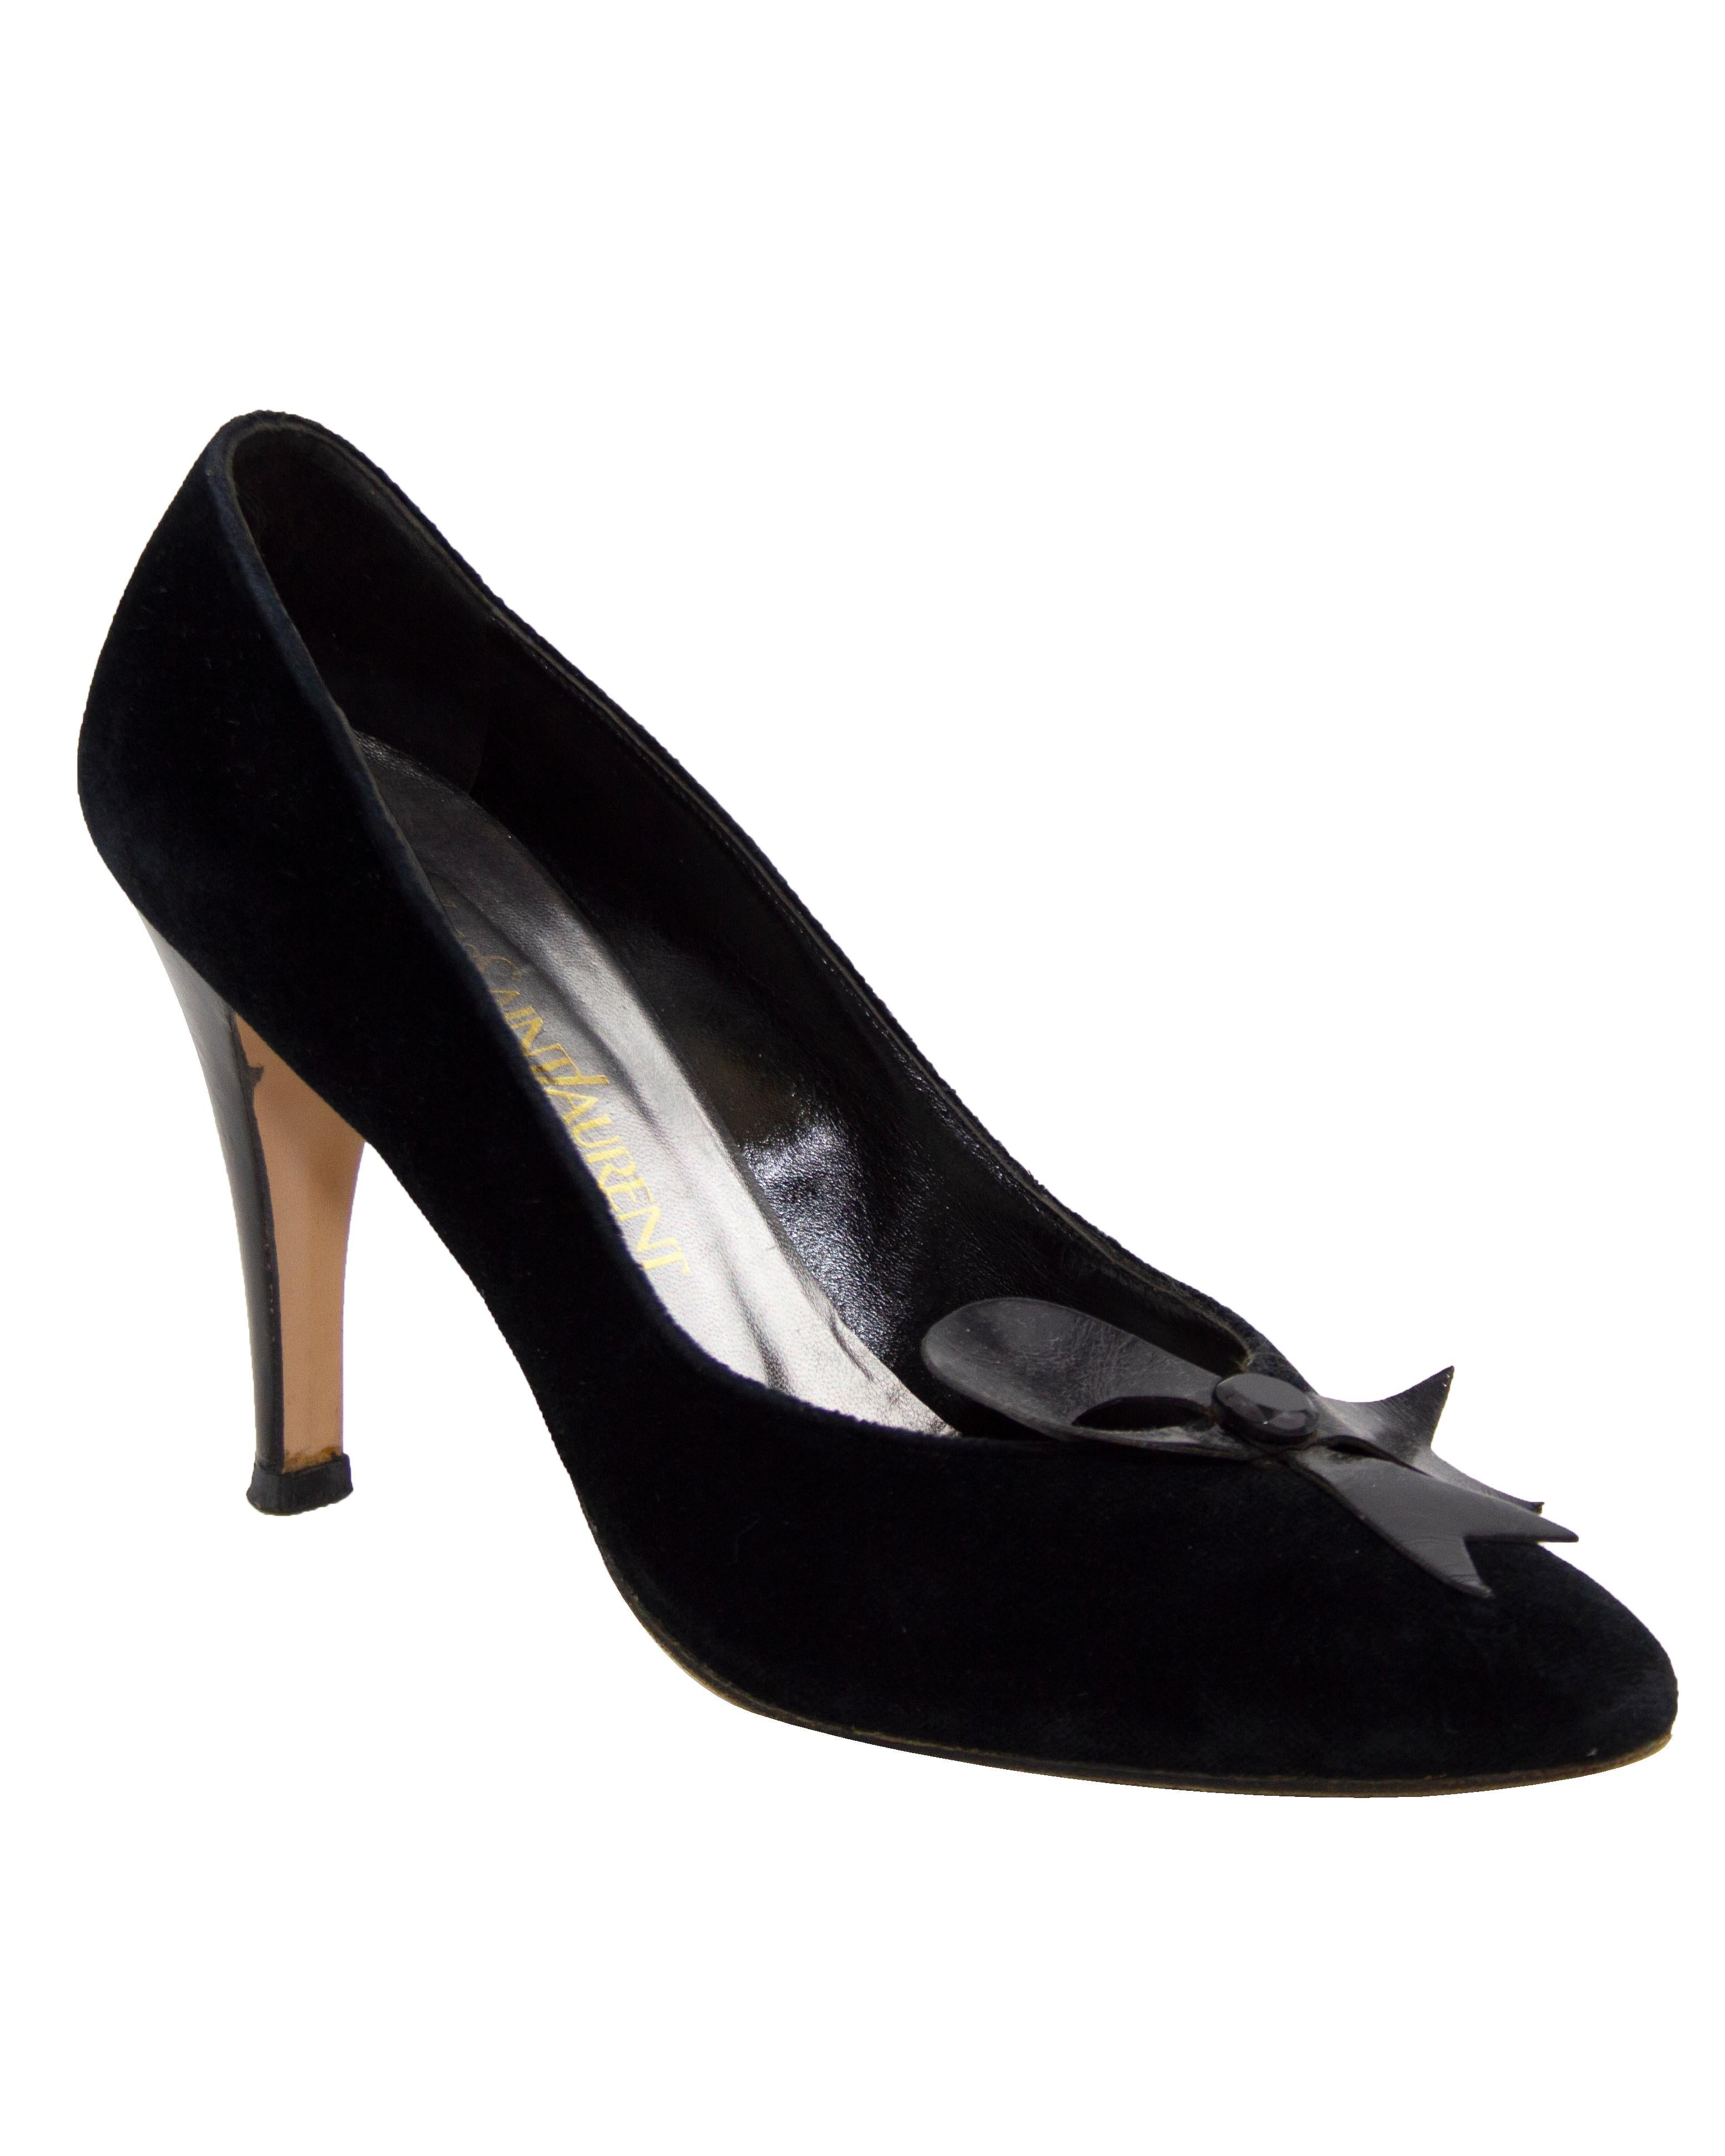 Very early pair of Yves Saint Lauren pumps. Circa the 1980s, these heels have a cut black velvet body with a black patent leather half bow detail on the toe box and black leather heels. The bows are embellished with a single black faux jewel in the